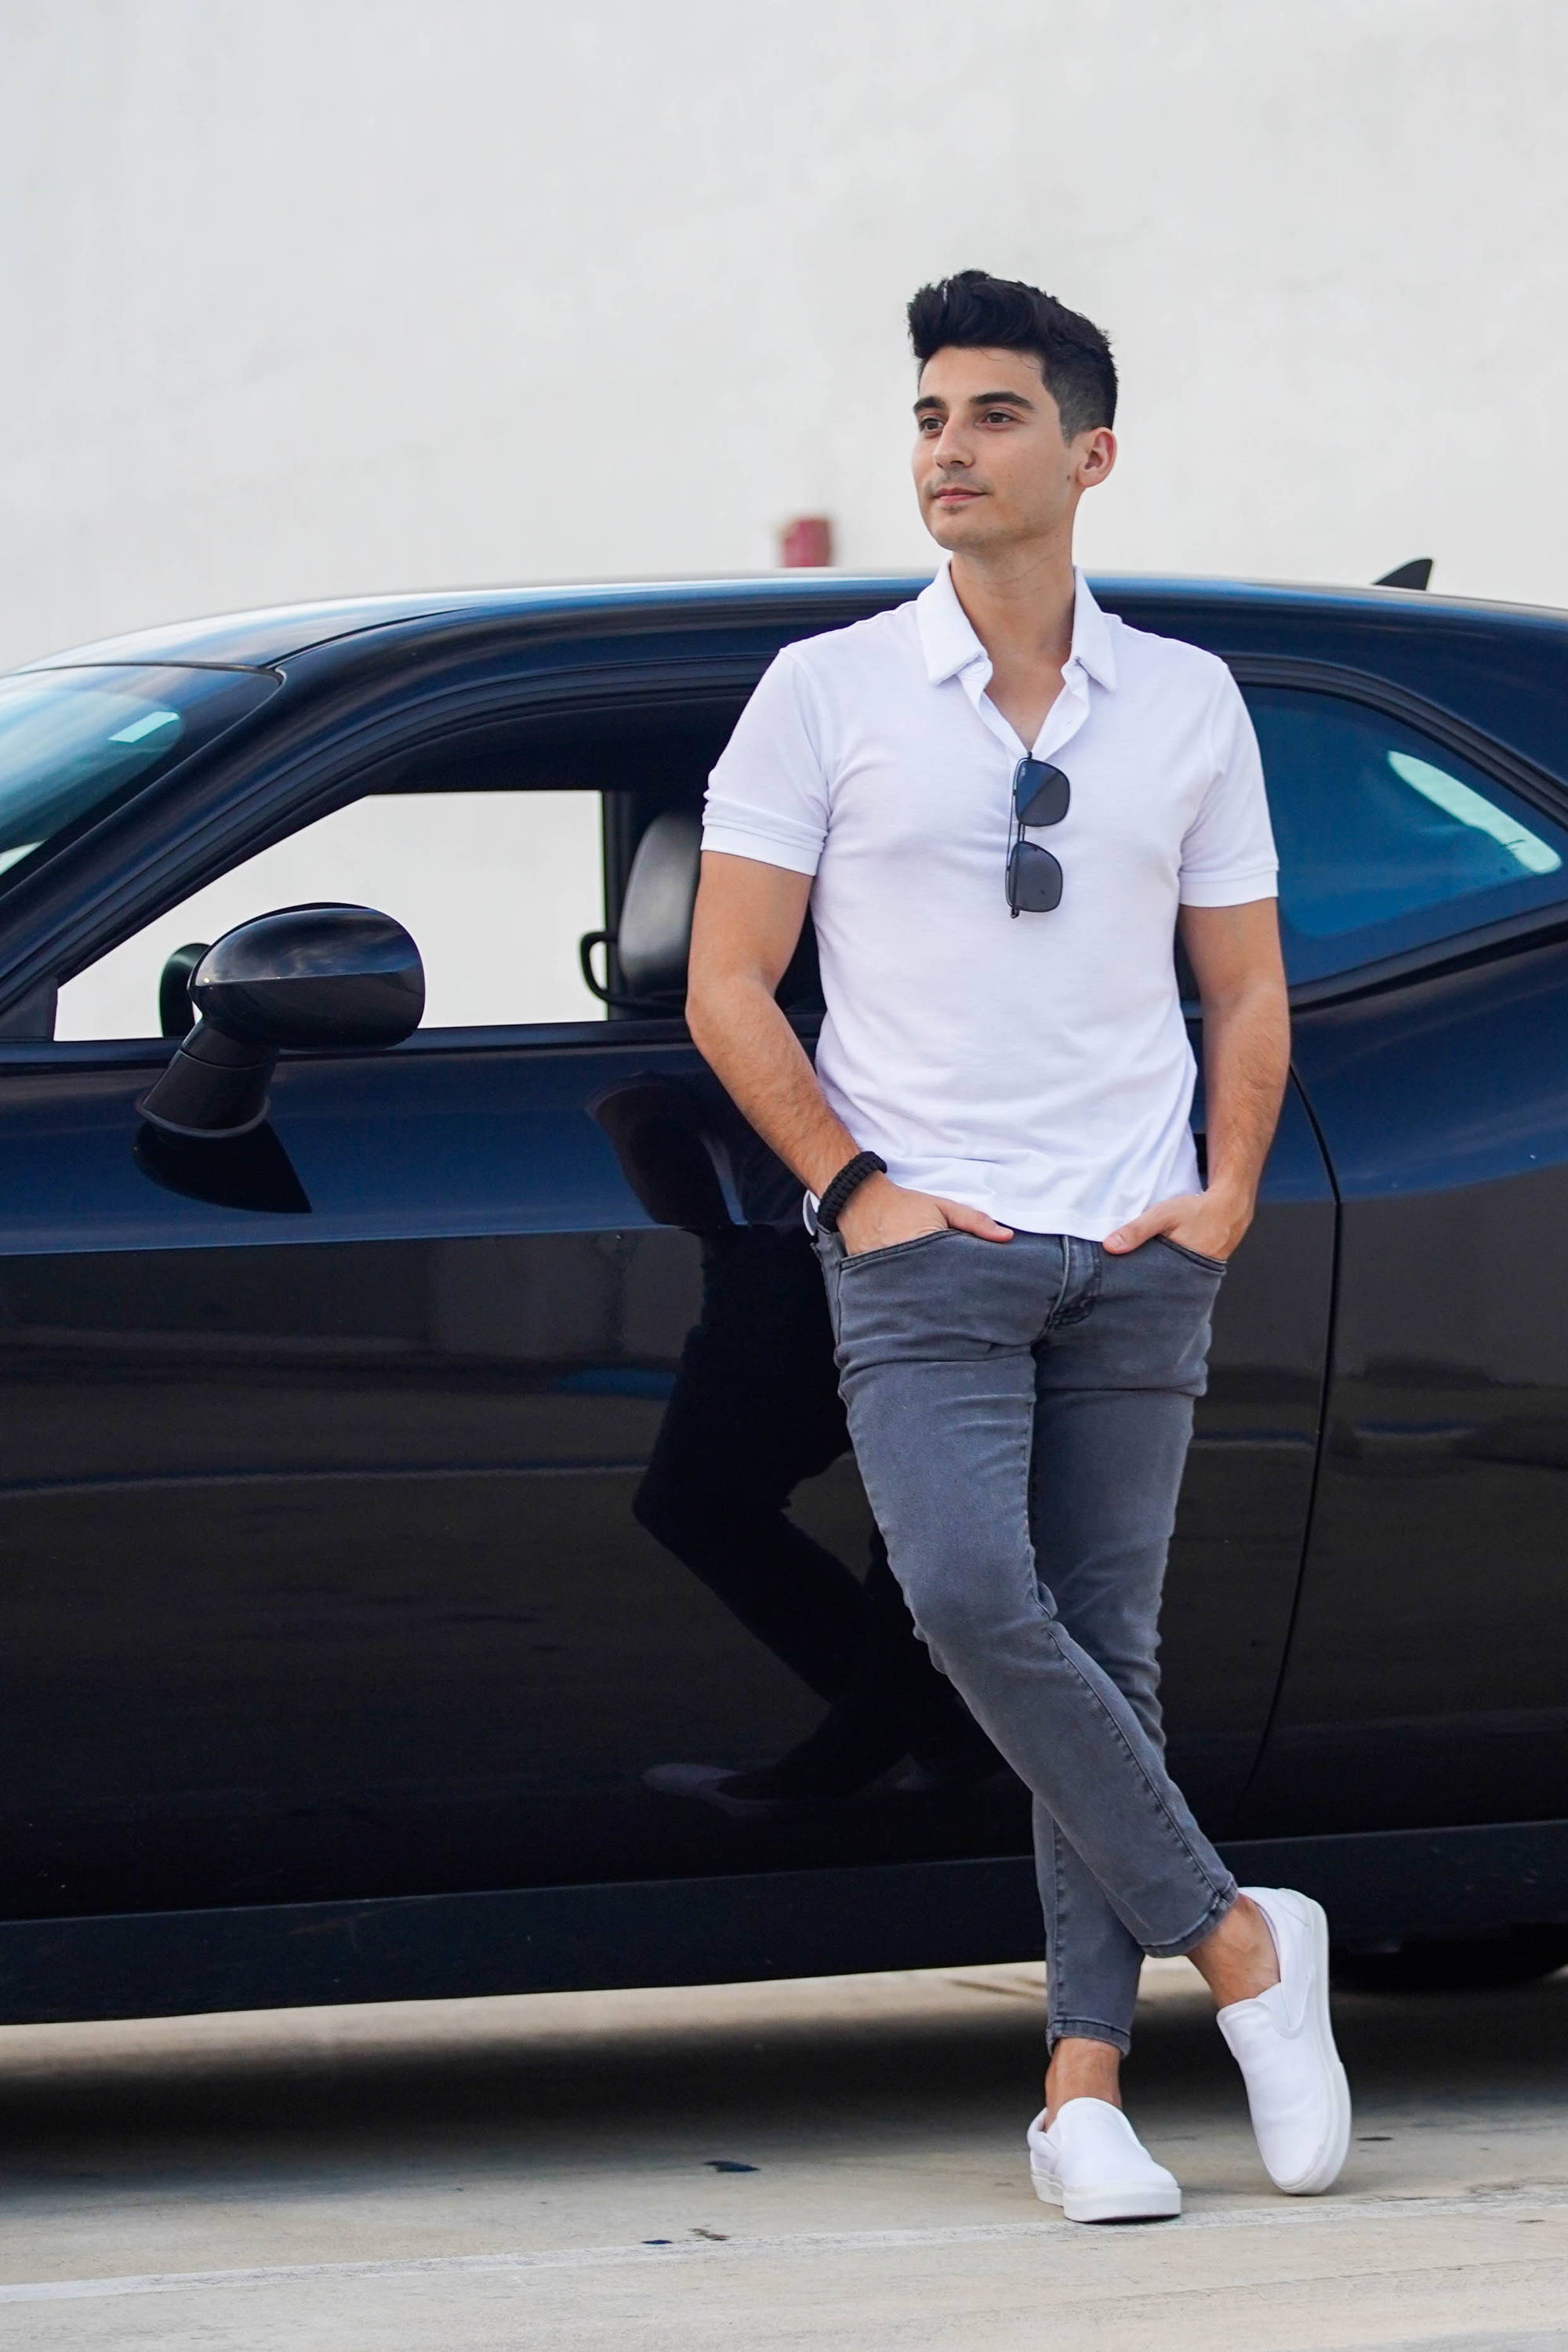 Man leaning against black car wearing white polo shirt, white shoes, and hands tucked into gray jeans pockets from under510.com